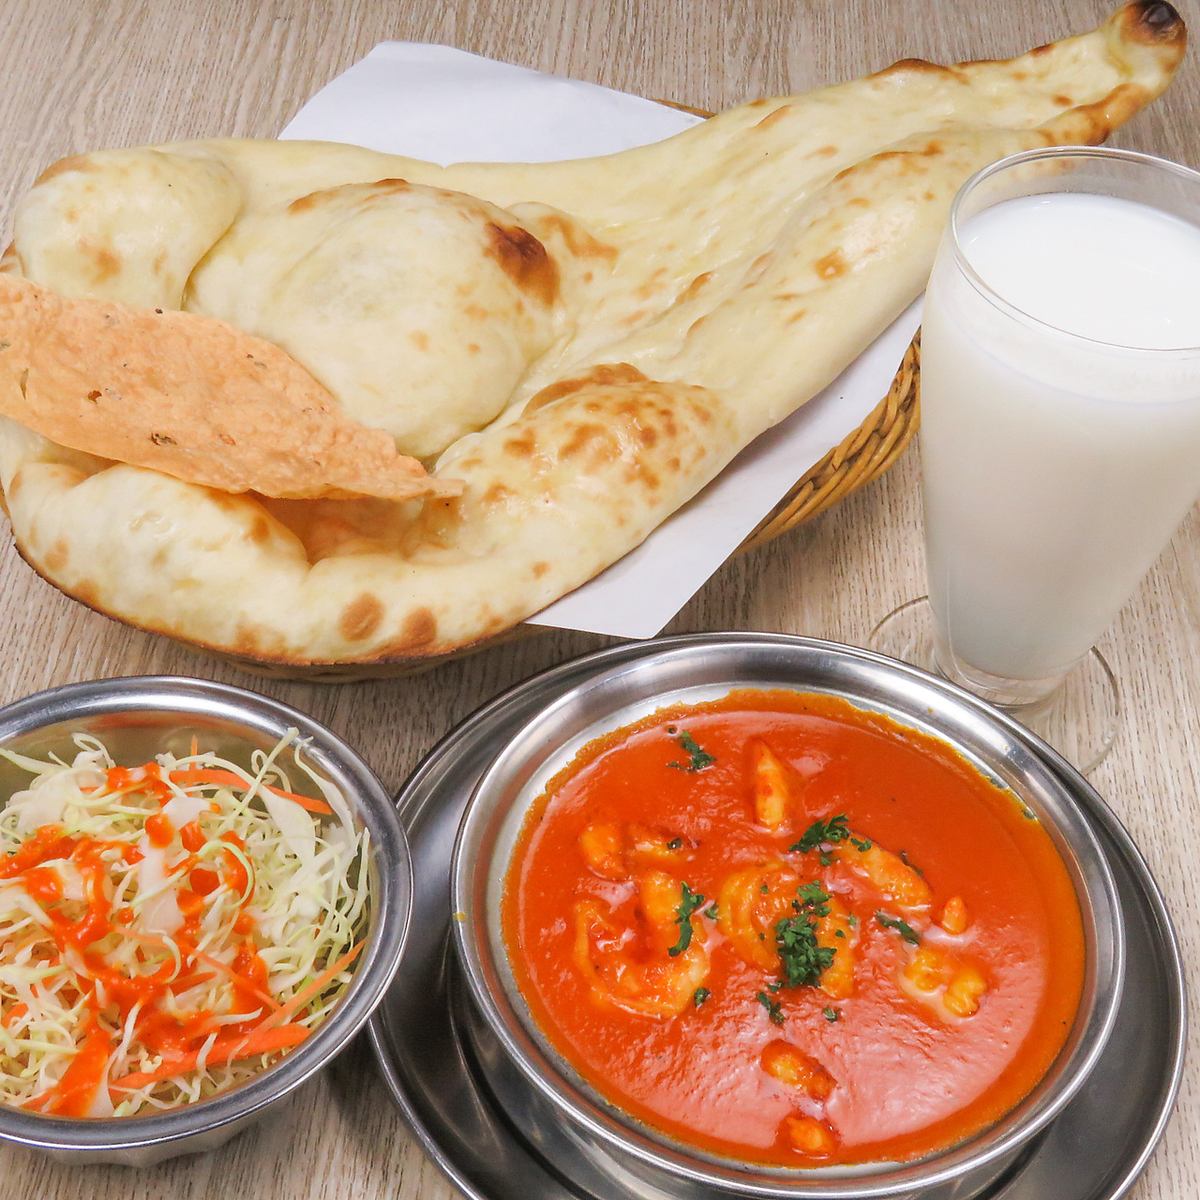 Authentic Indian cuisine made by Indian chef.Arranged for Japan, it is delicious and easy to eat.